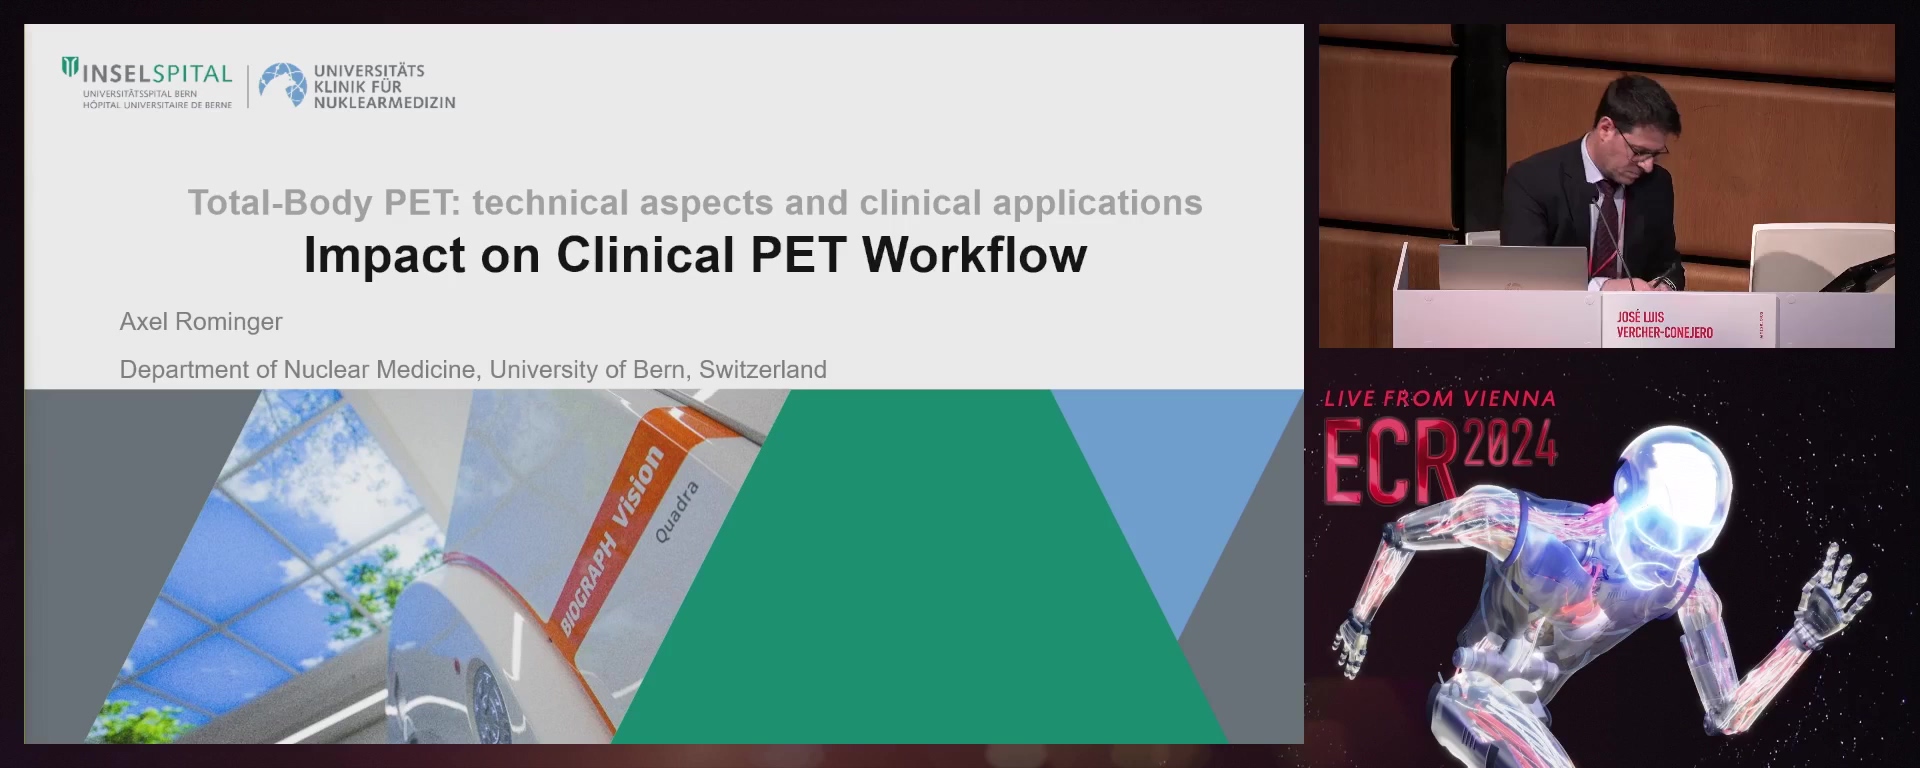 Impact on clinical PET workflow